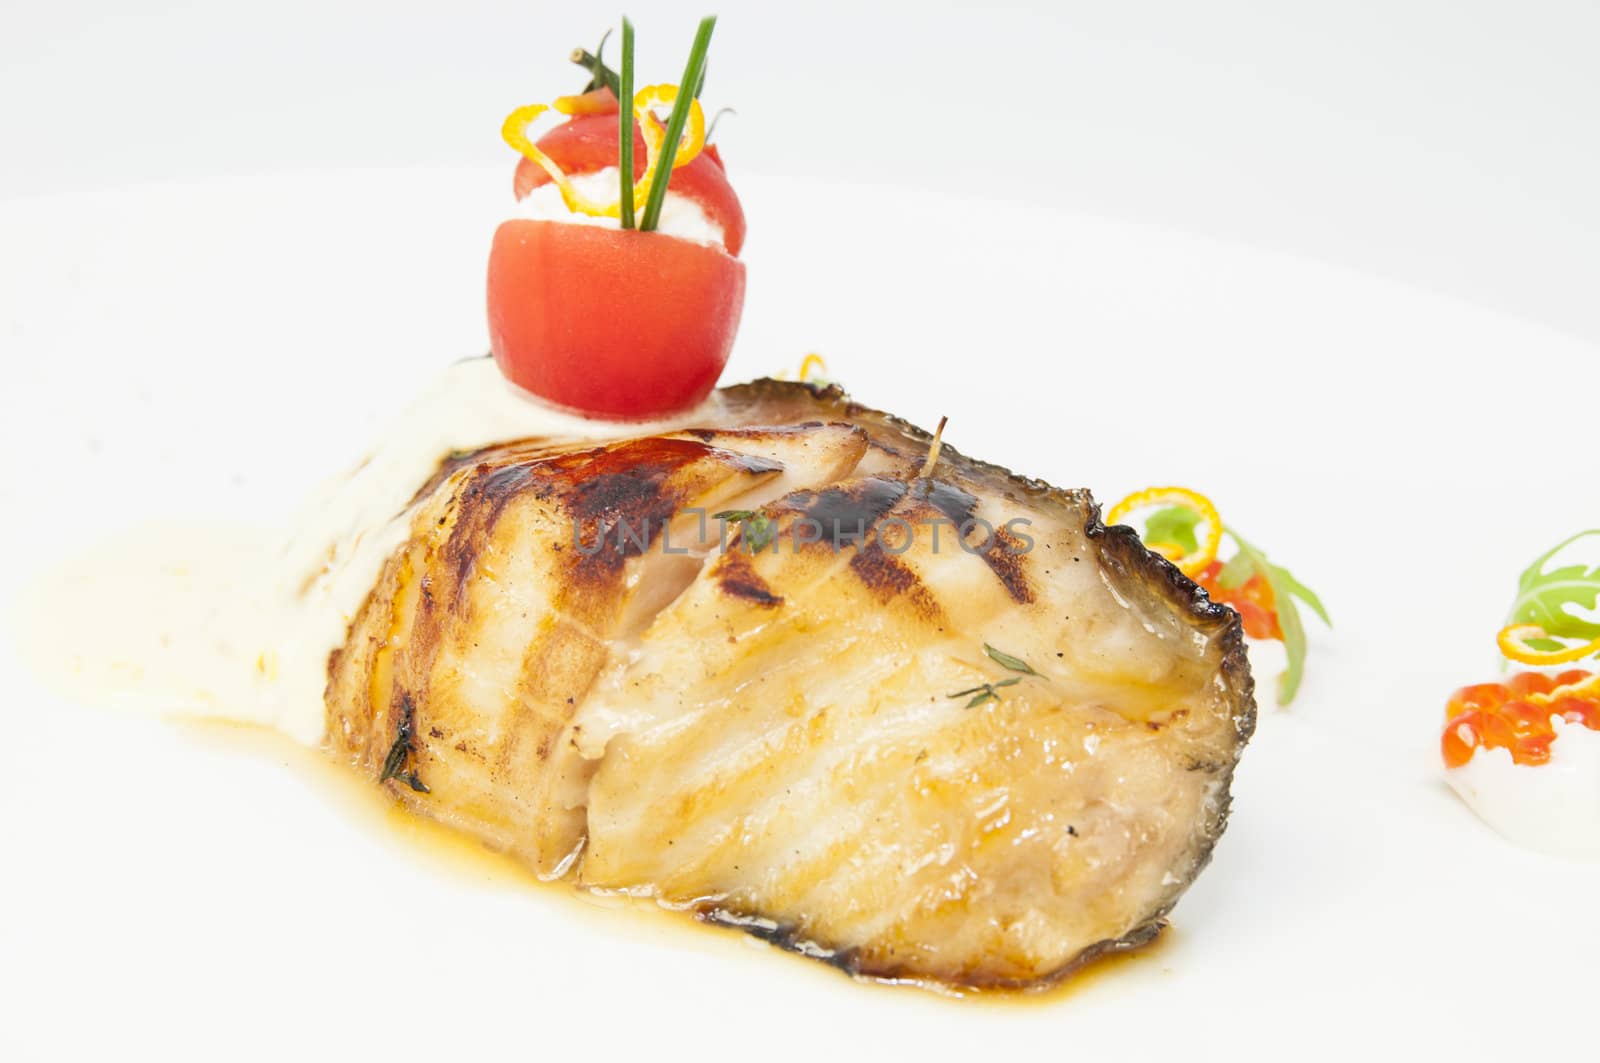 Roasted fillet of grilled fish in a white sauce